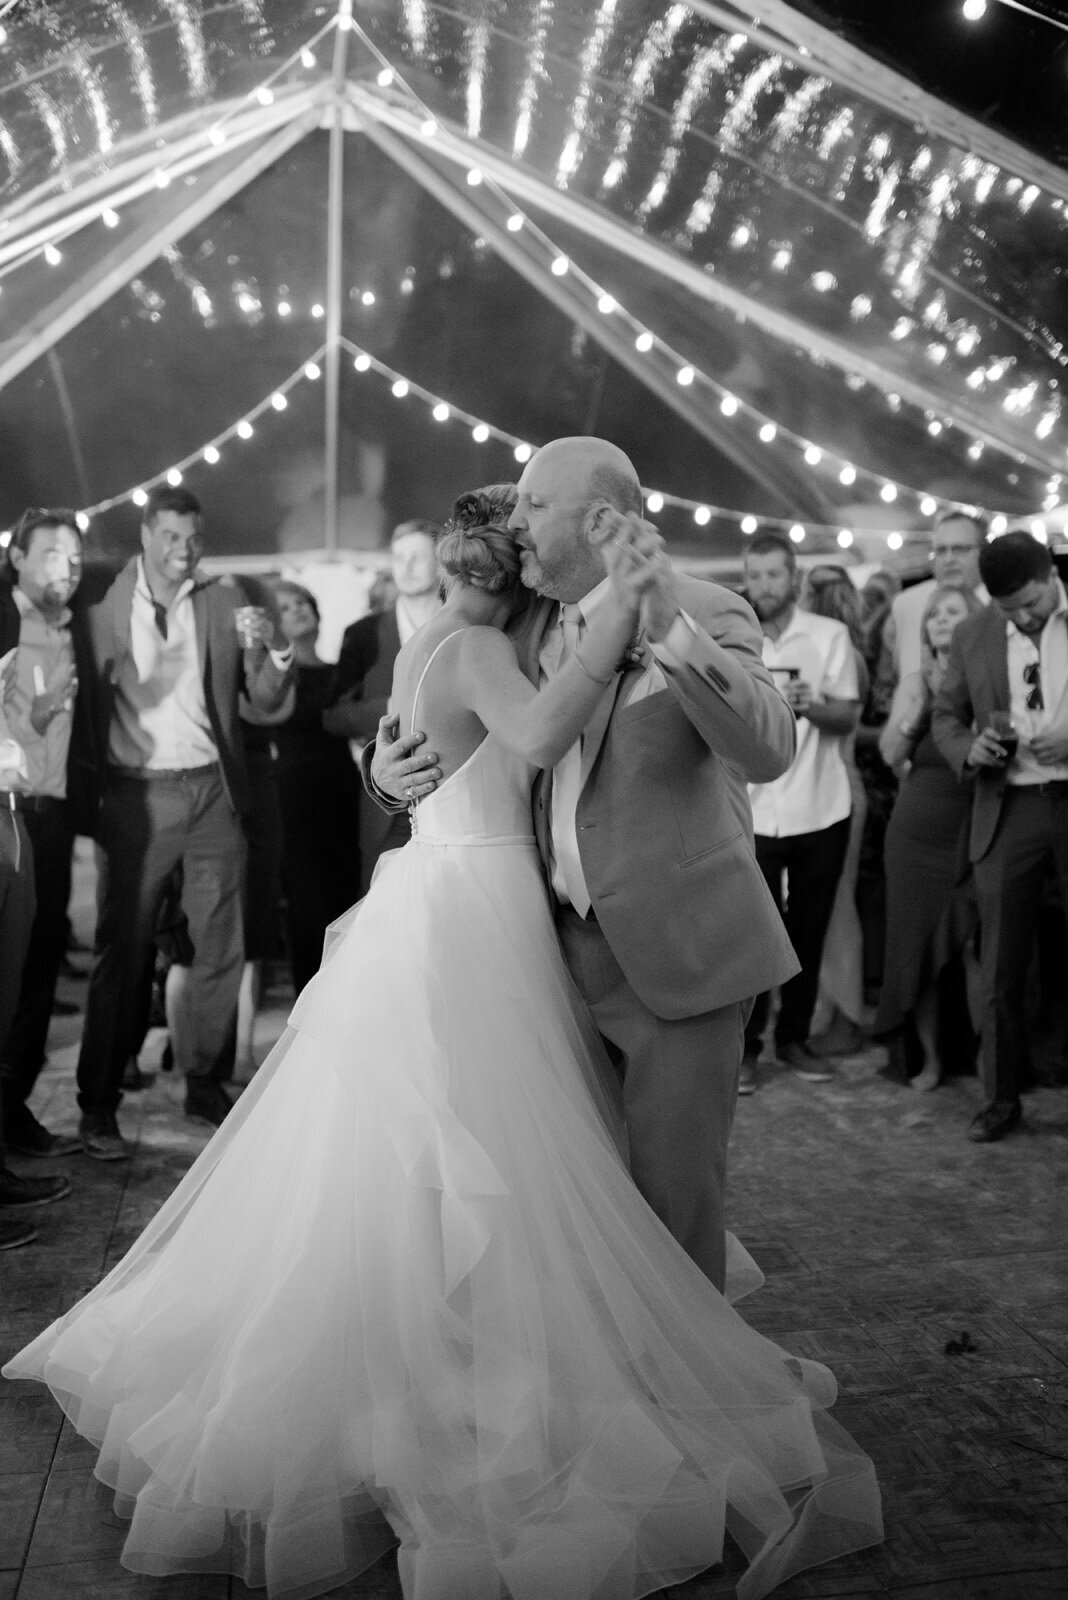 Kate-Murtaugh-Events-tropical-wedding-clear-top-bistro-light-tent-father-daughter-dance